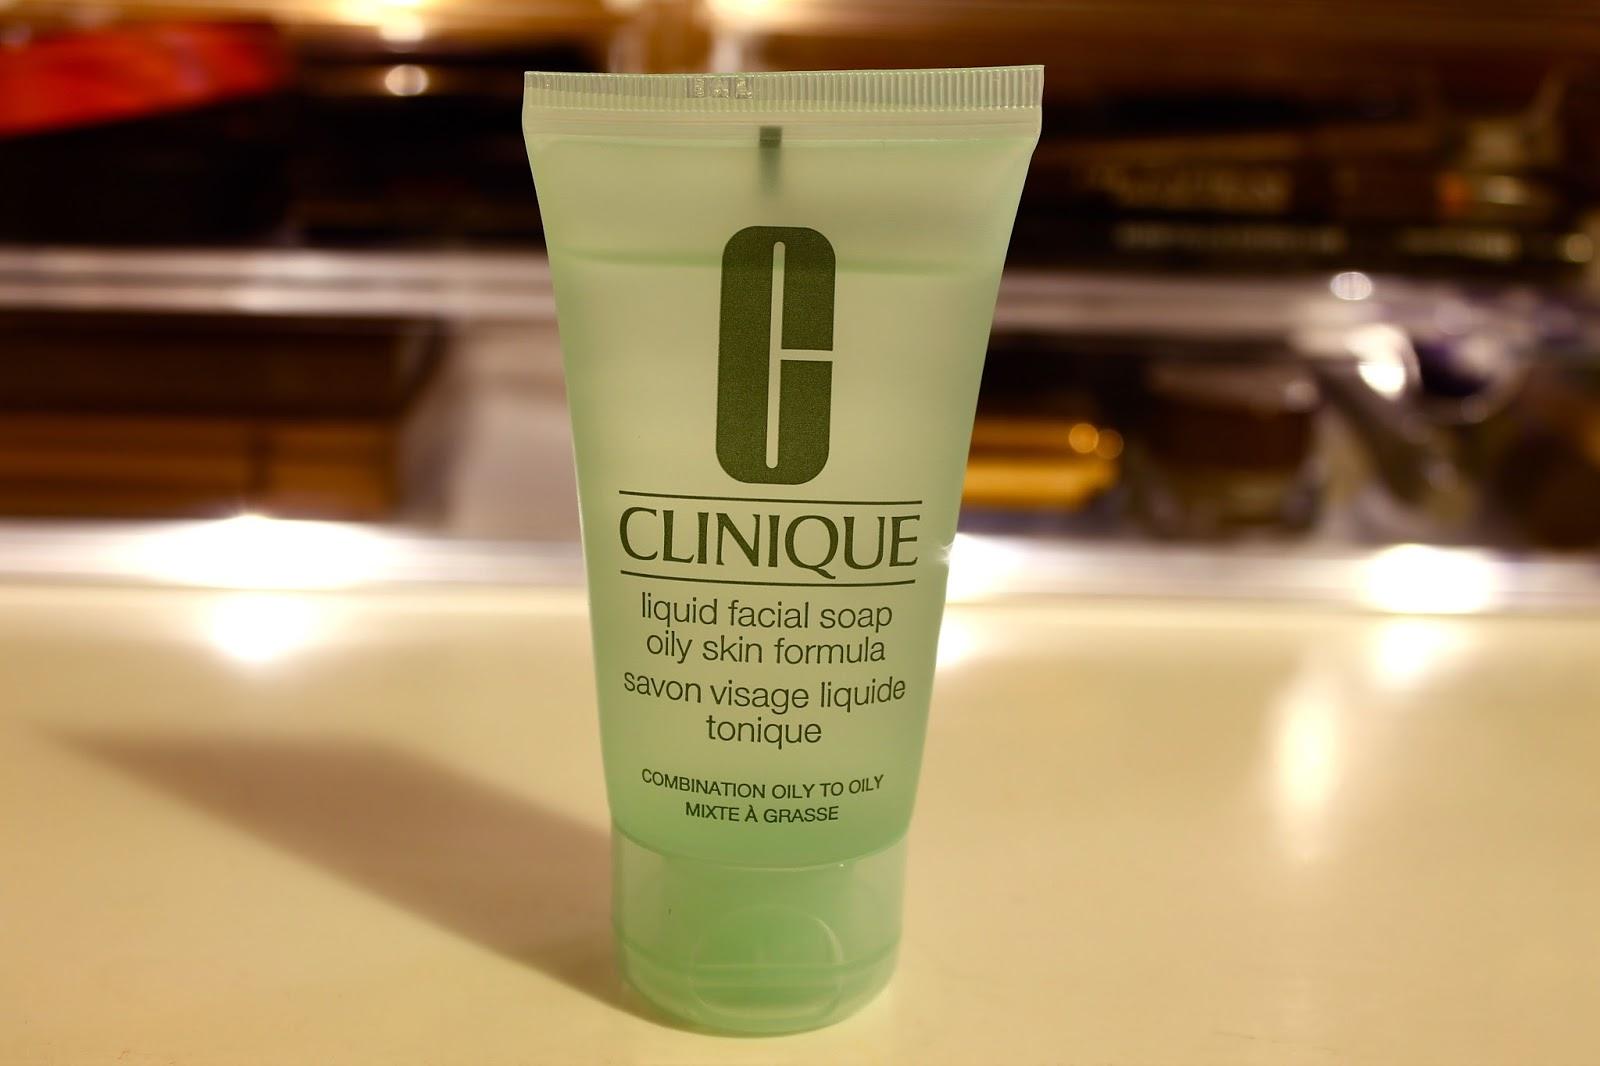 Juice reccomend Review for clinique facial cleansers